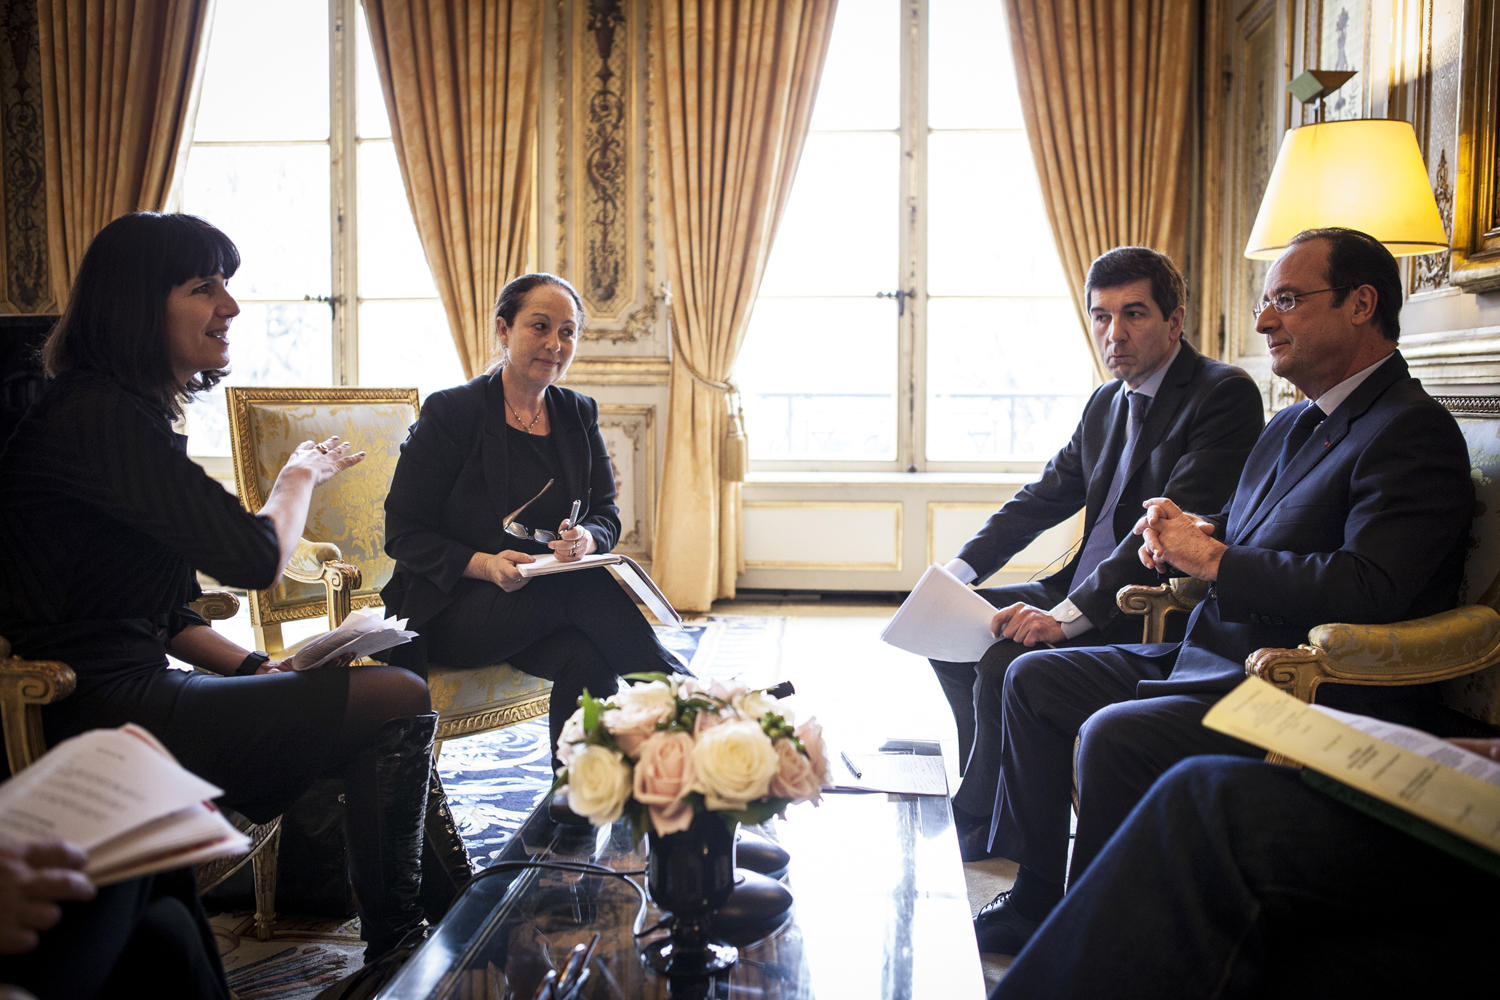 TIME's Catherine Mayer and Vivienne Walt talk to Francois Hollande in the lyse Palace, Paris. Marco Grob for TIME